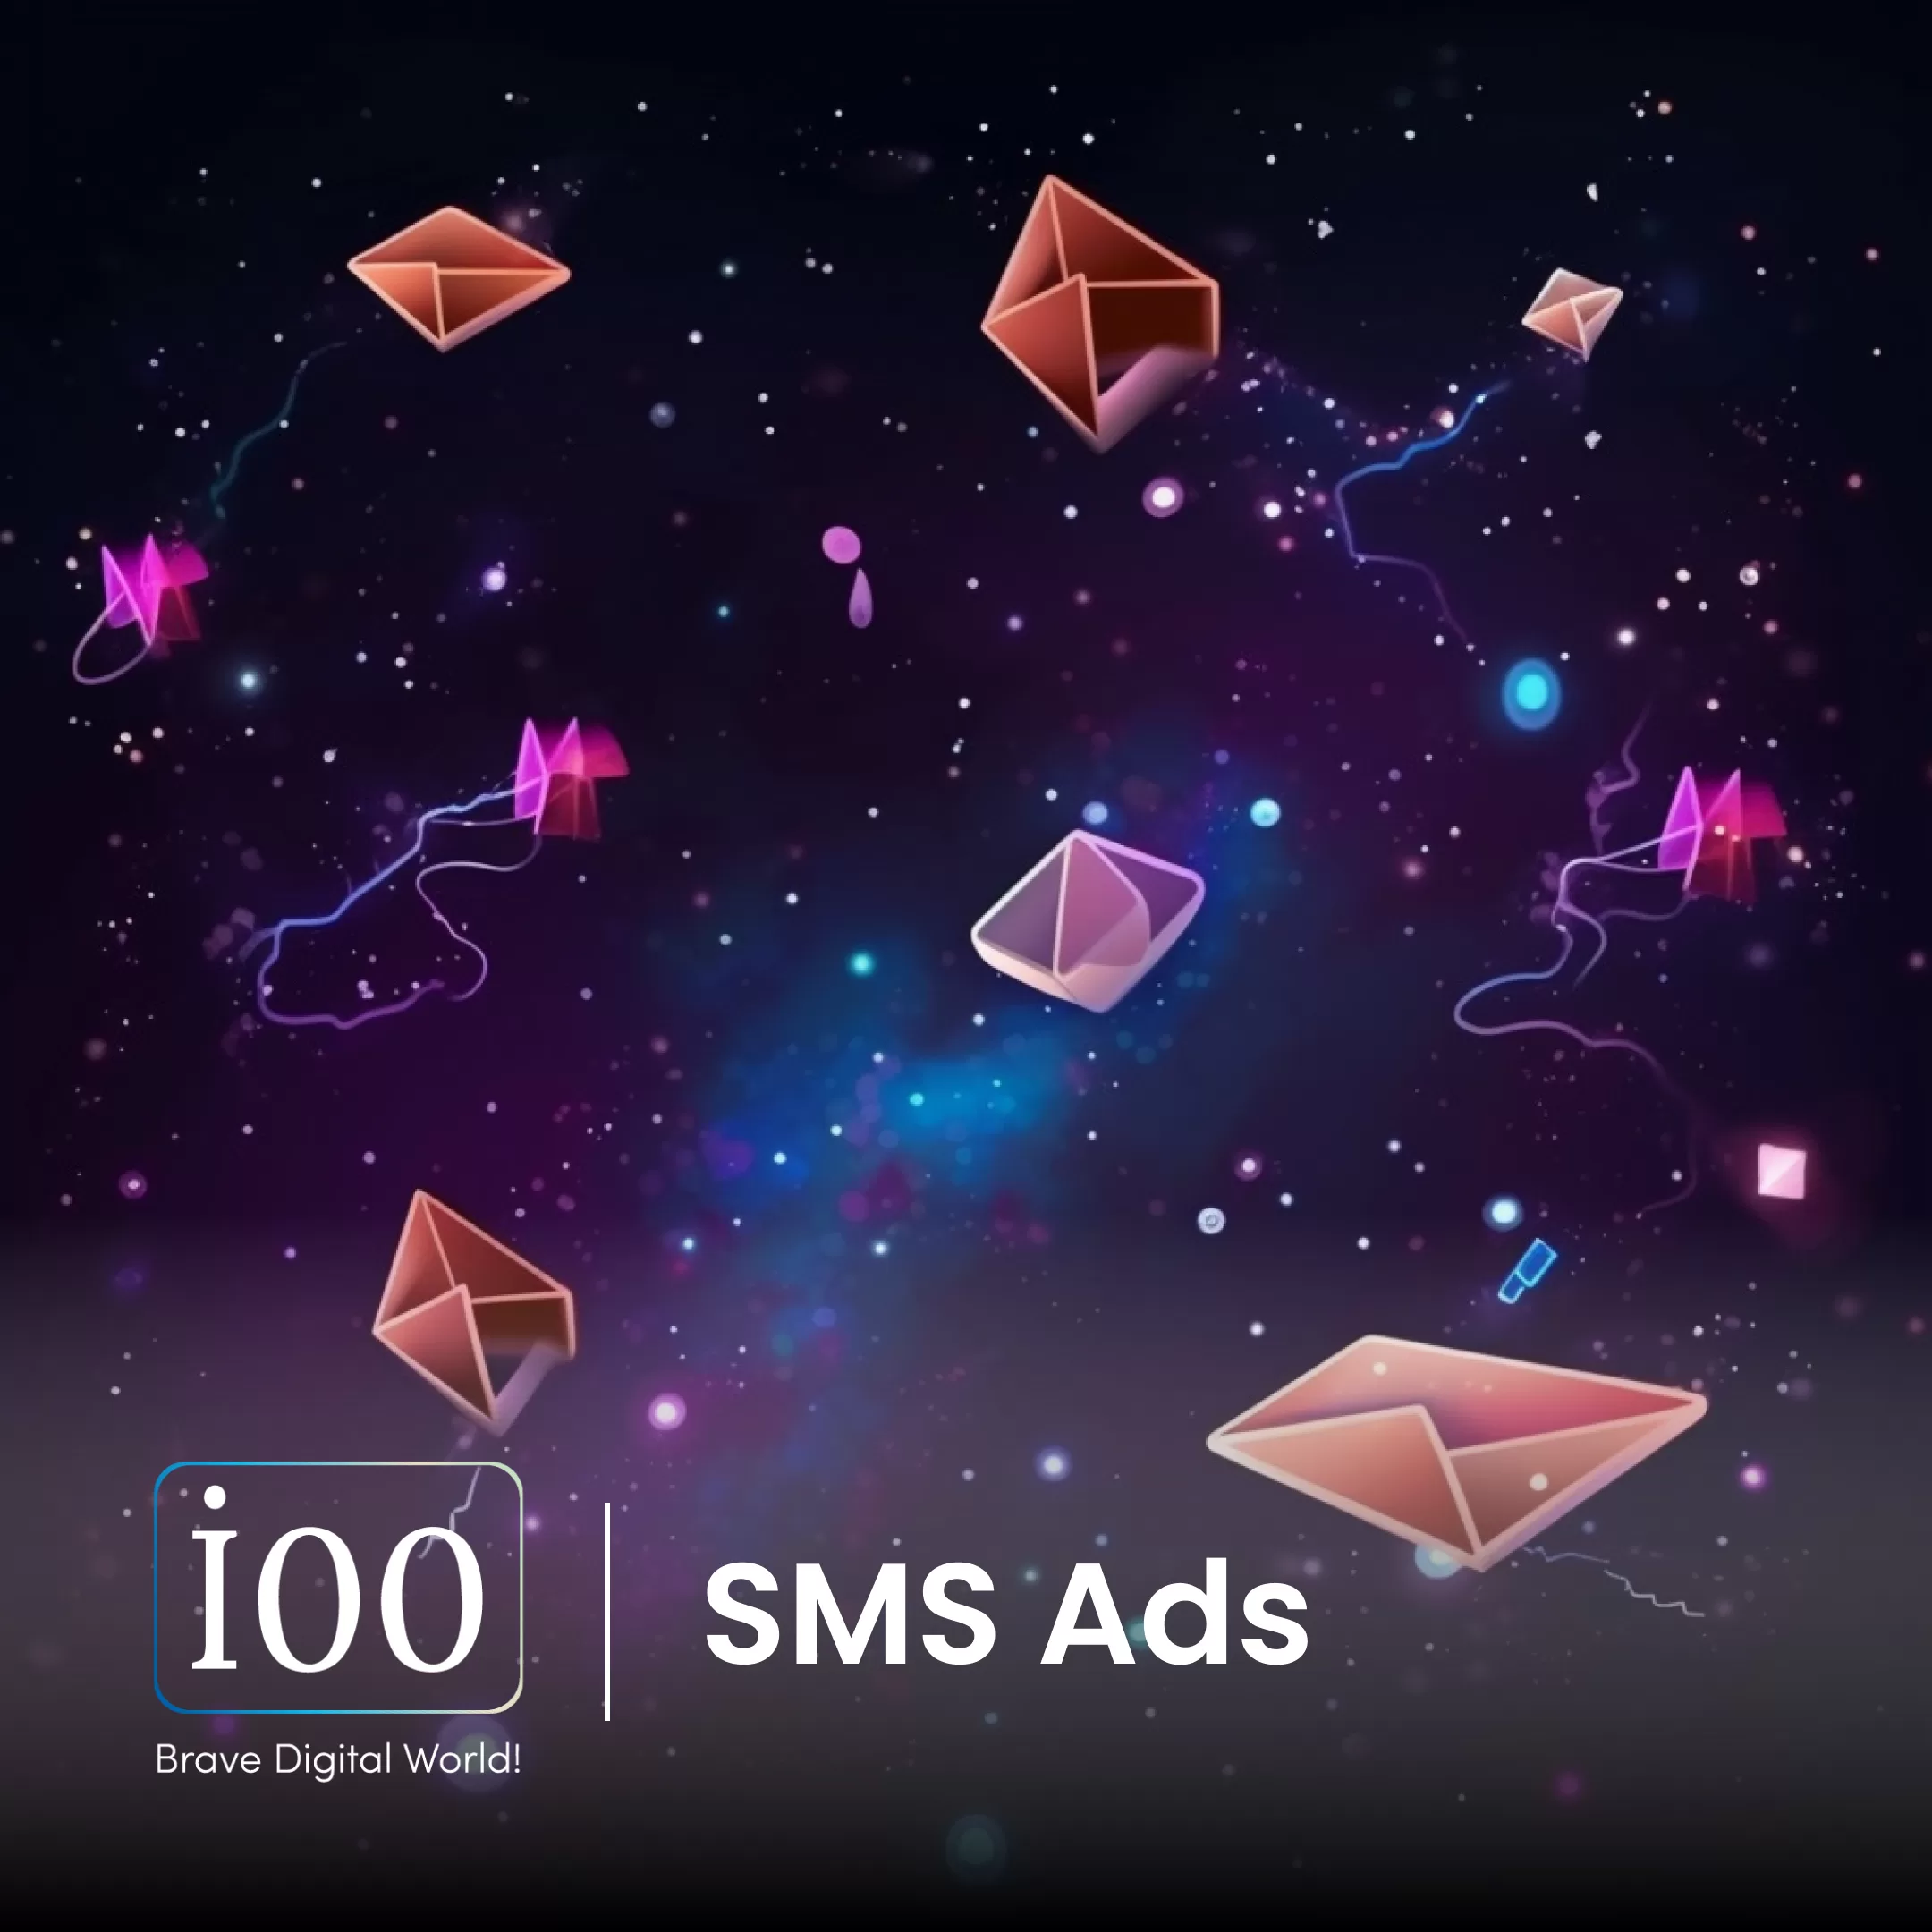 SMS Ads campaigns - i00